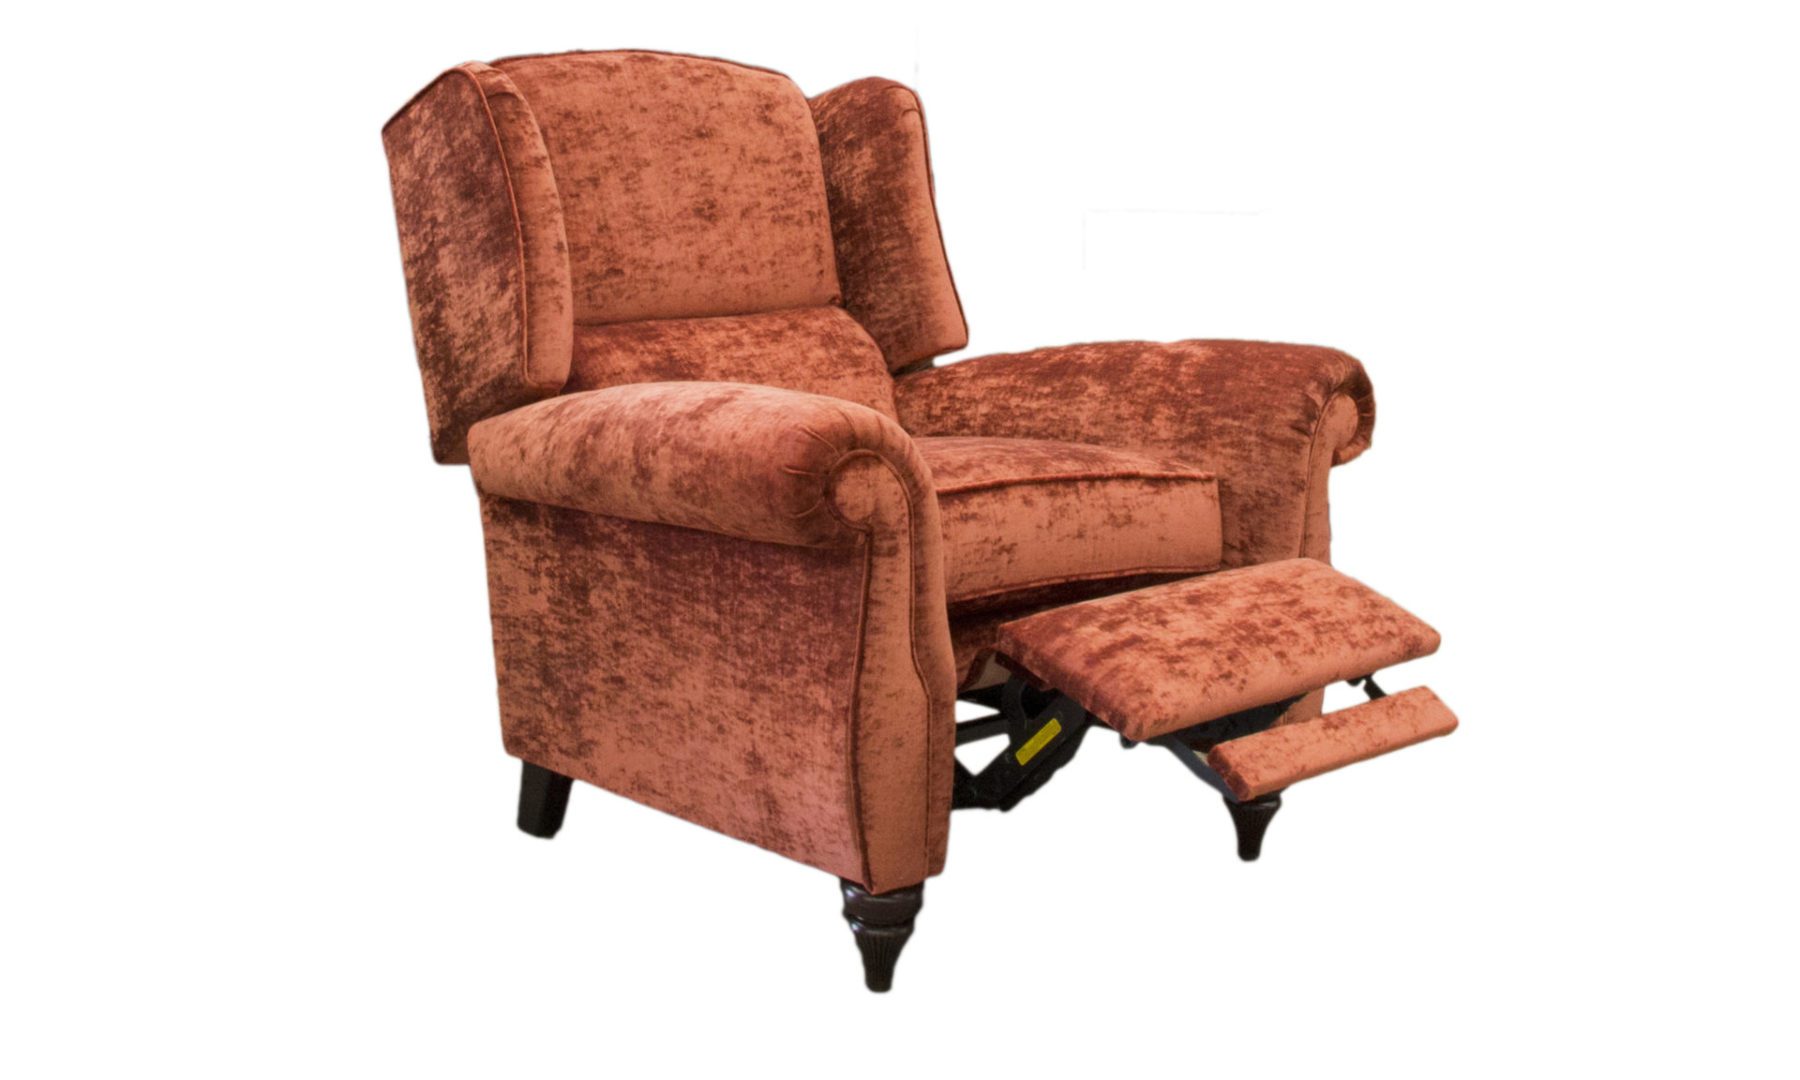 Greville Recliner Chair in JBrown Modena Terracotta 13105, Platinum Plus Collection Fabric